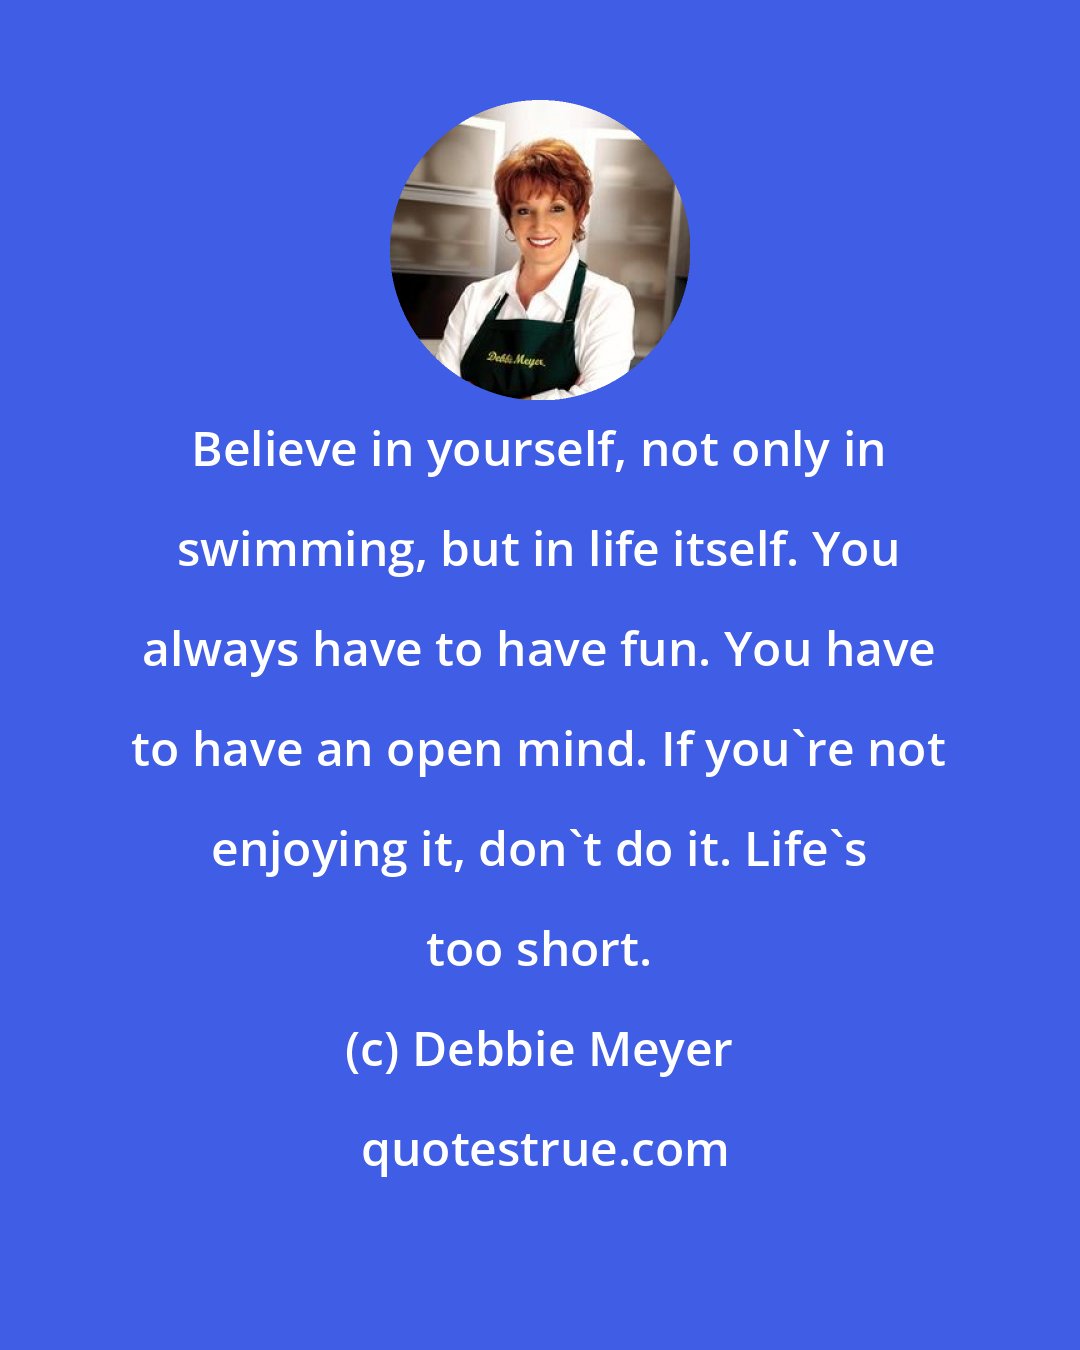 Debbie Meyer: Believe in yourself, not only in swimming, but in life itself. You always have to have fun. You have to have an open mind. If you're not enjoying it, don't do it. Life's too short.